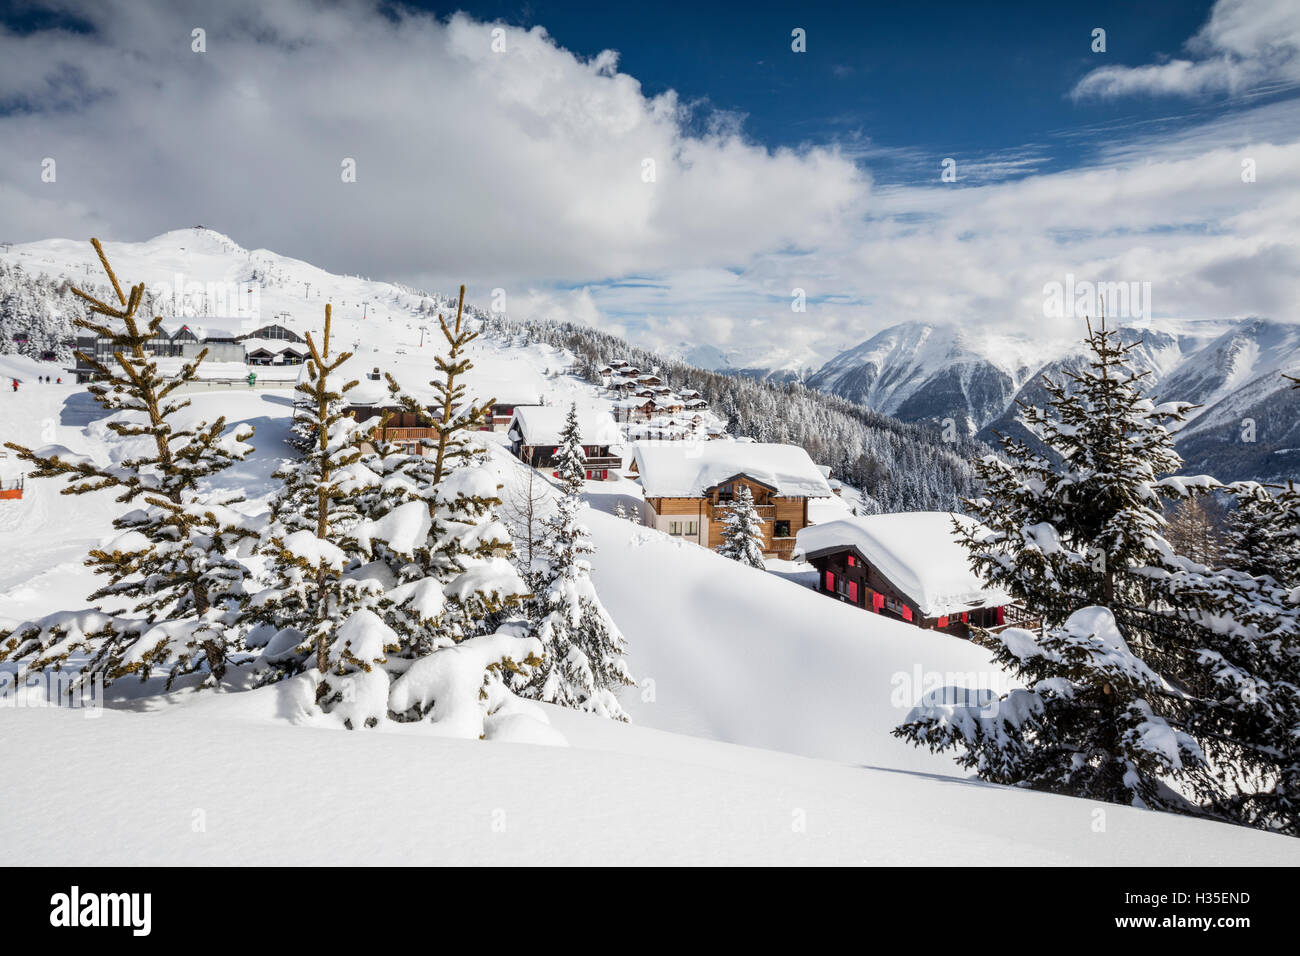 The winter sun shines on the snowy mountain huts and woods, Bettmeralp, district of Raron, canton of Valais, Switzerland Stock Photo